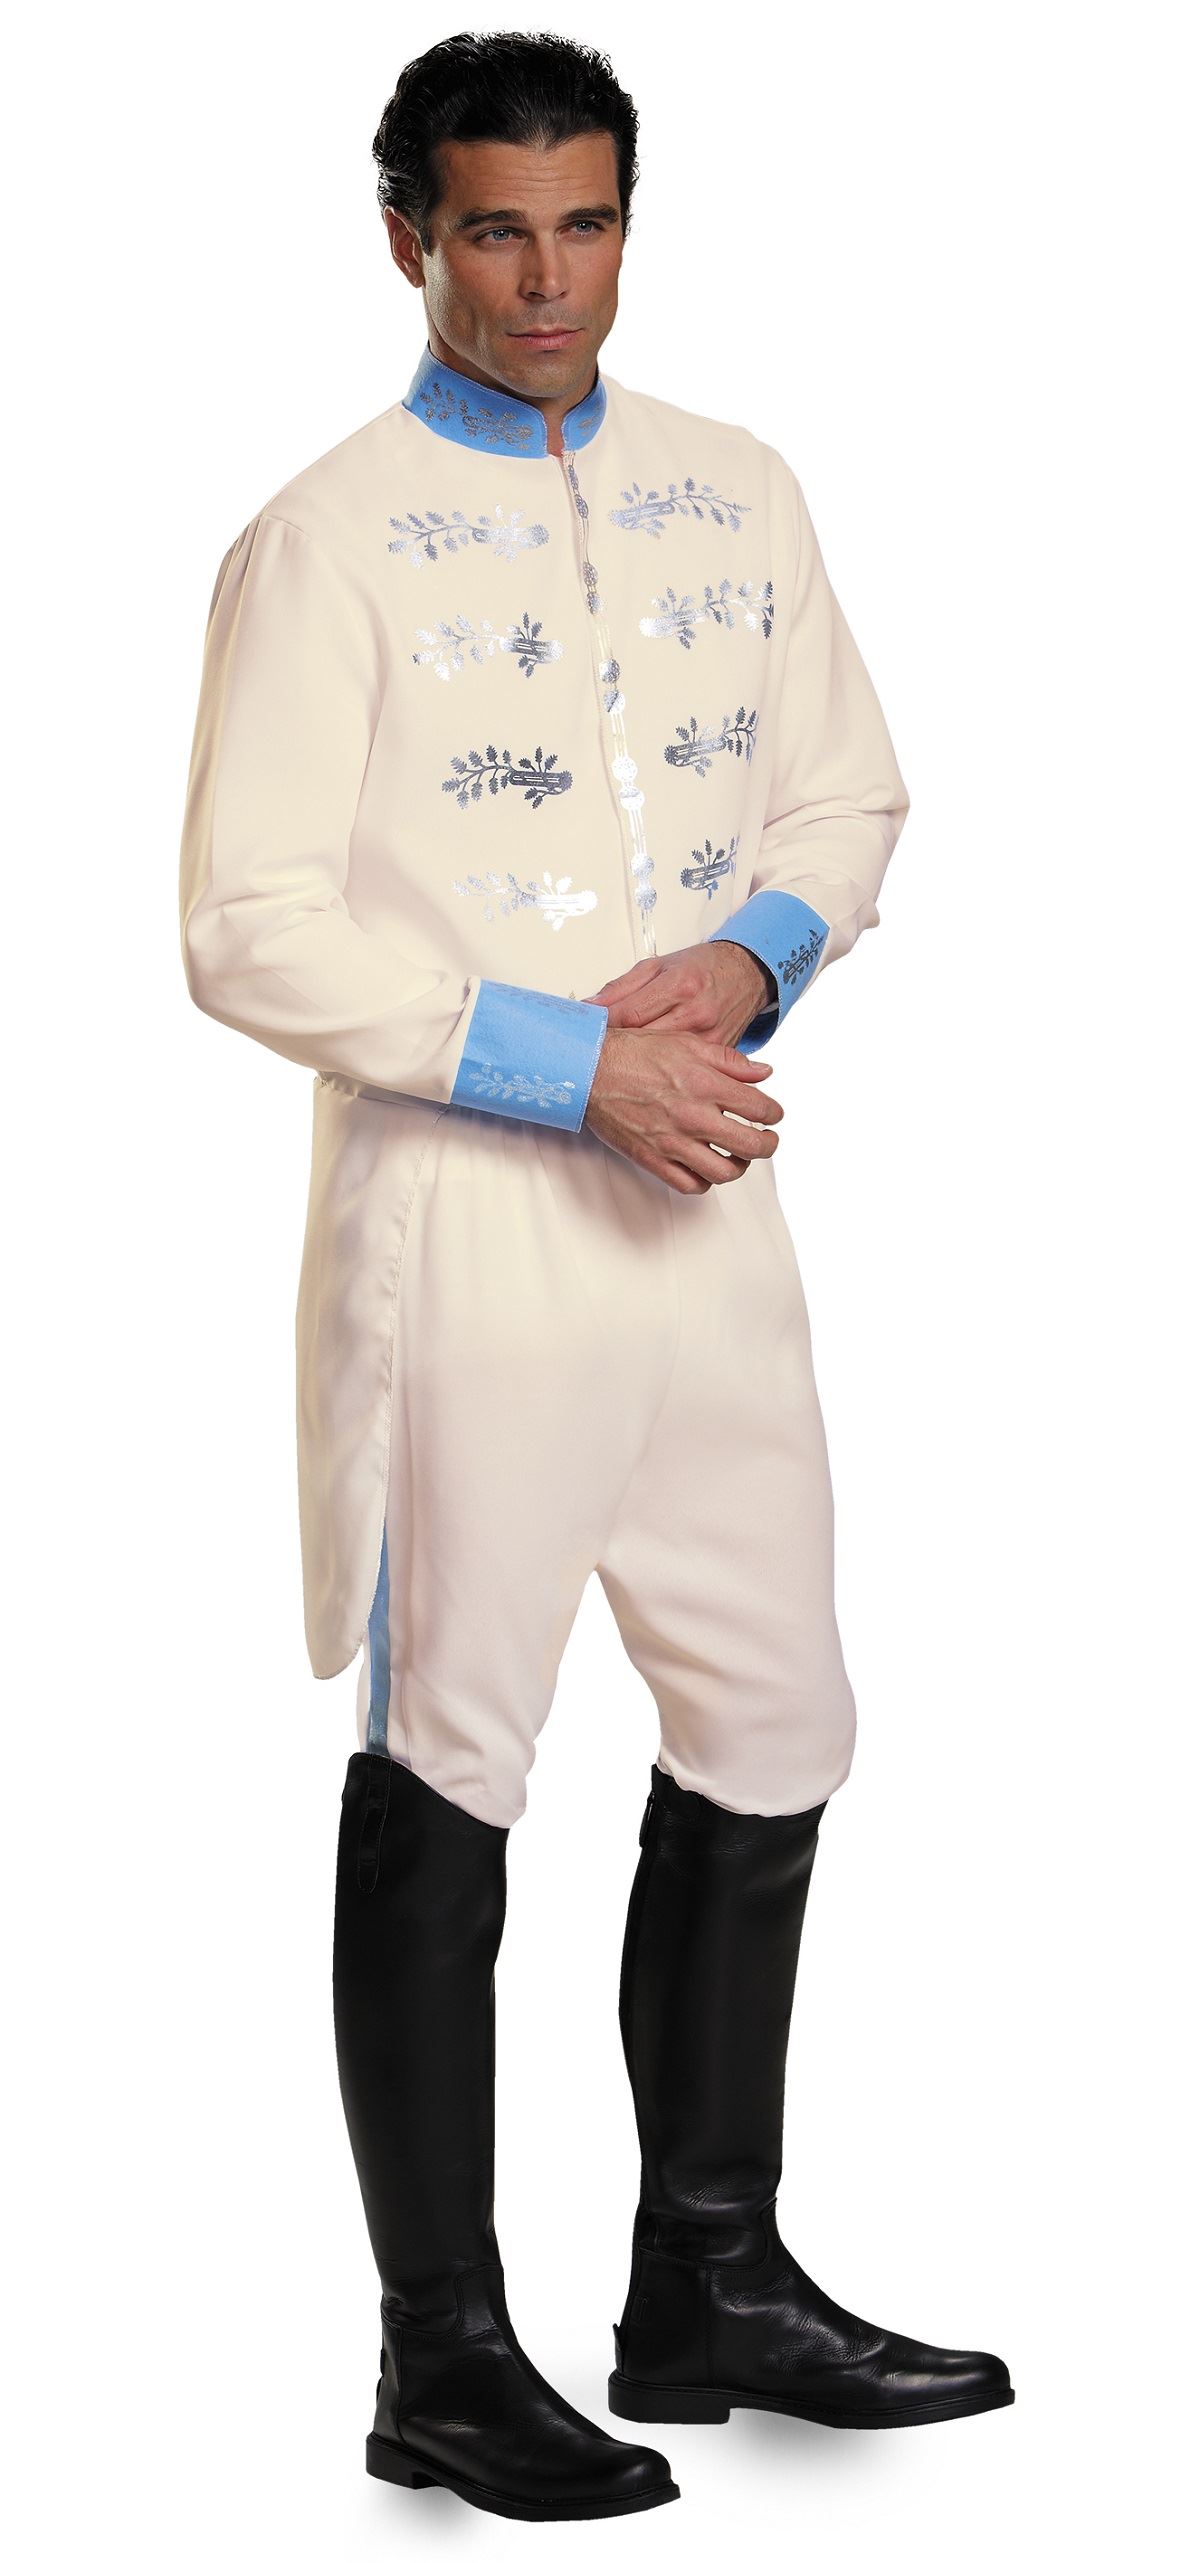 Adult Prince Charming Men Deluxe Costume 47.99 The